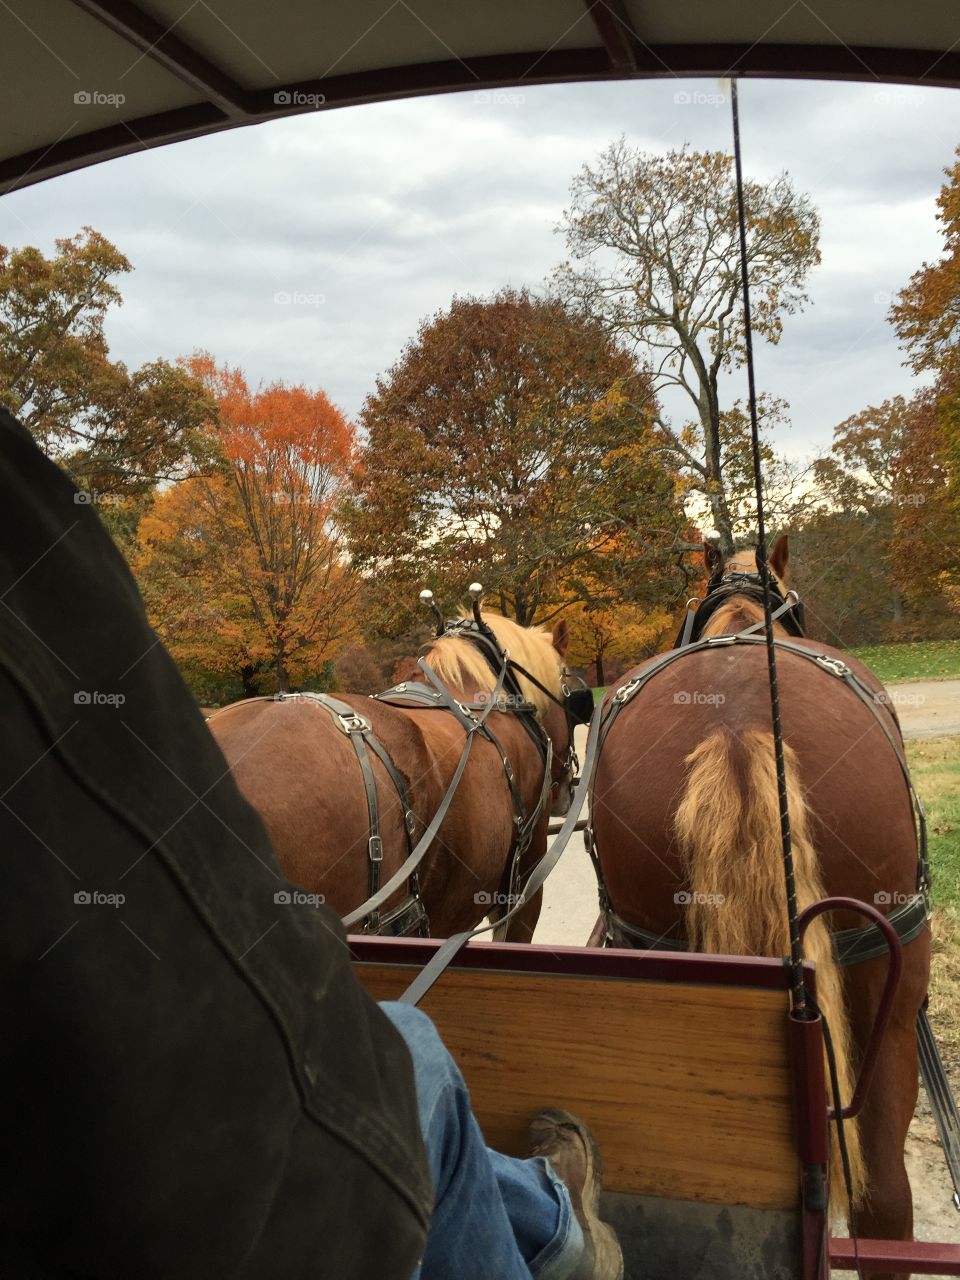 Fall Carriage Ride